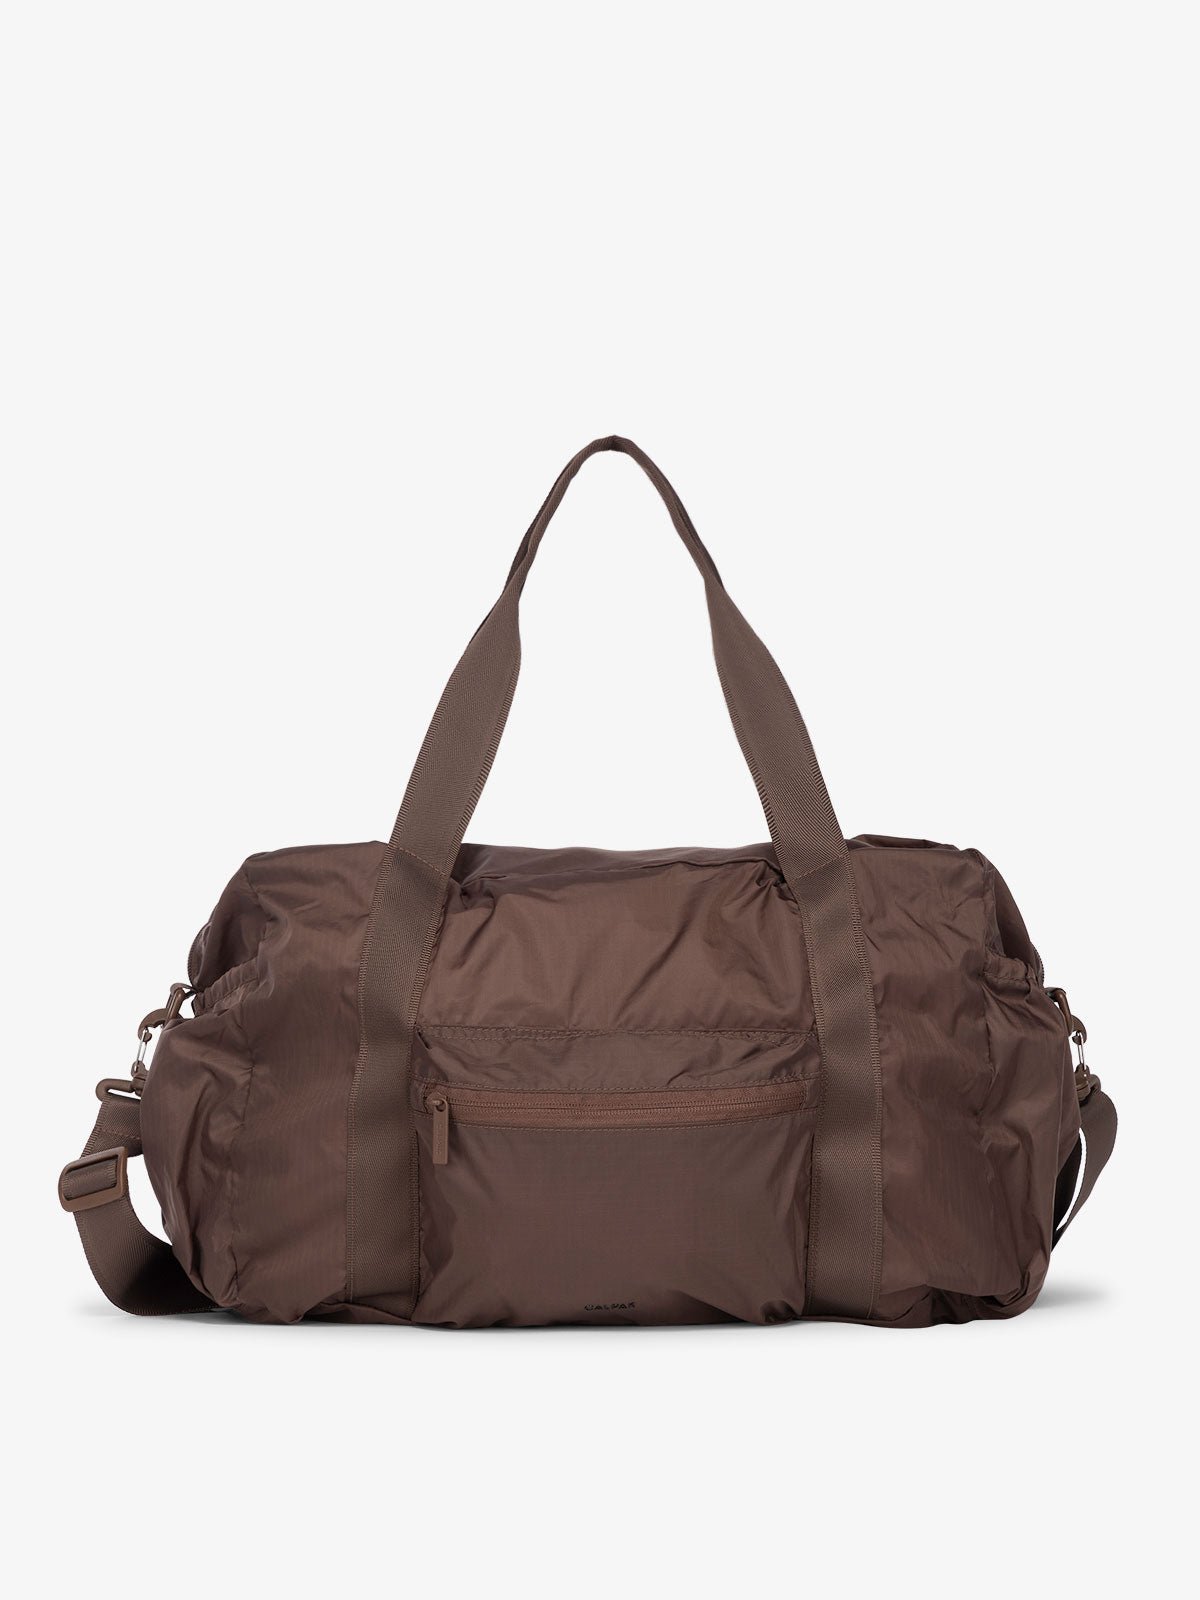 CALPAK Compakt duffel bag with removable crossbody strap and water resistant fabric in walnut